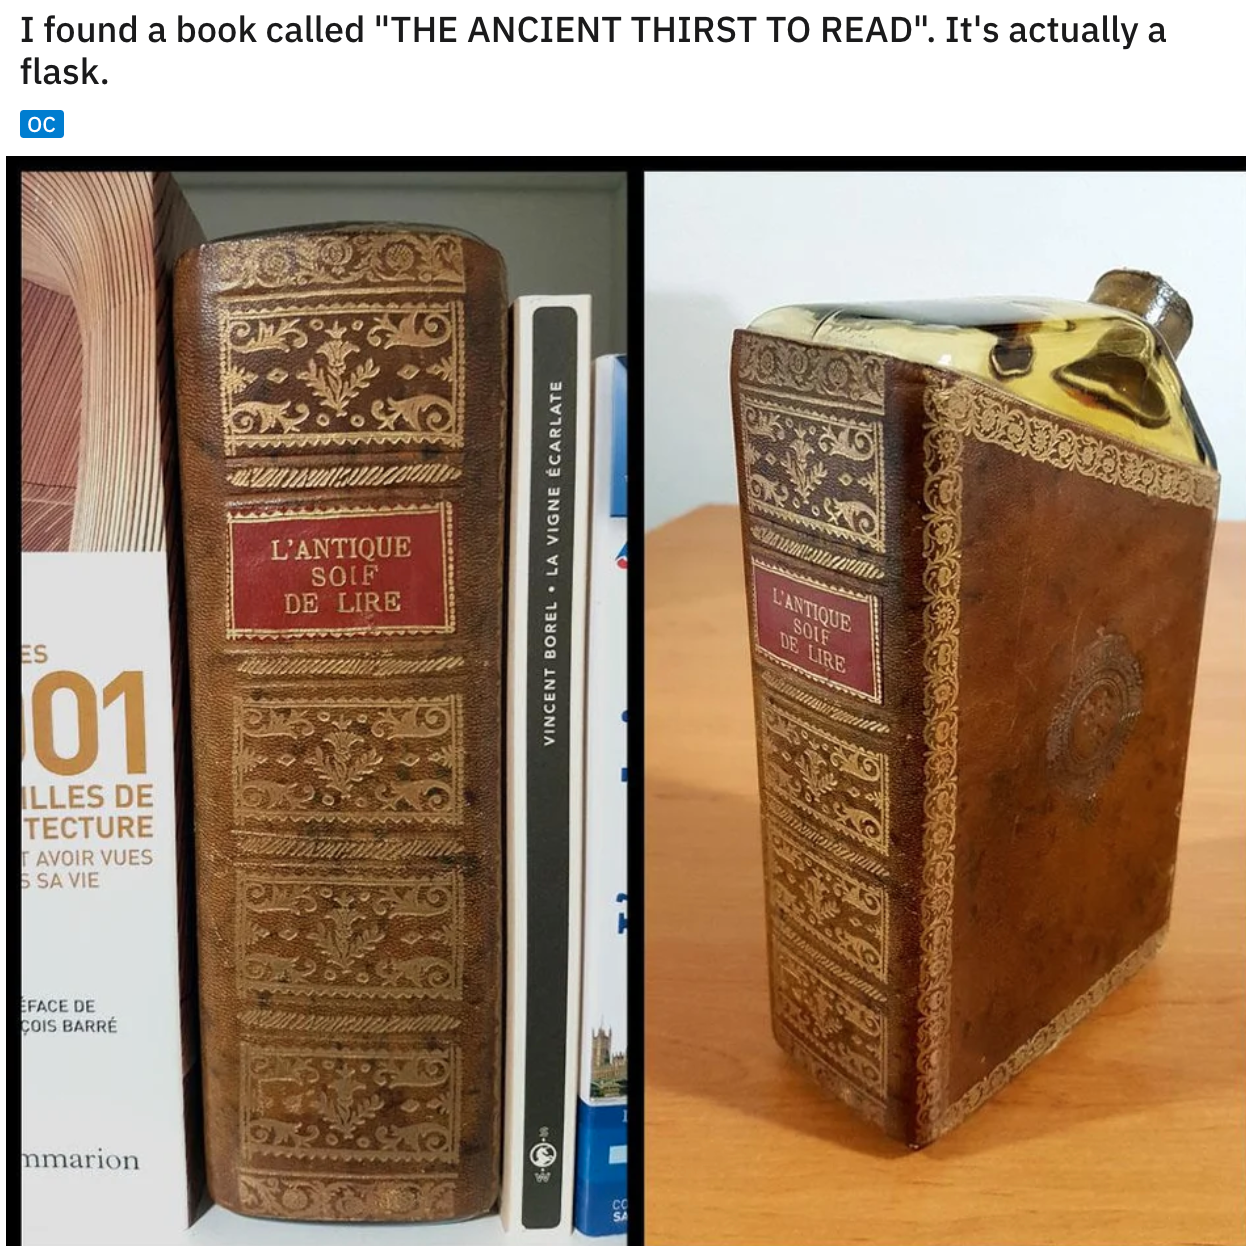 cool and funny pics - I found a book called the ancient thirst to read and it's actually a flask